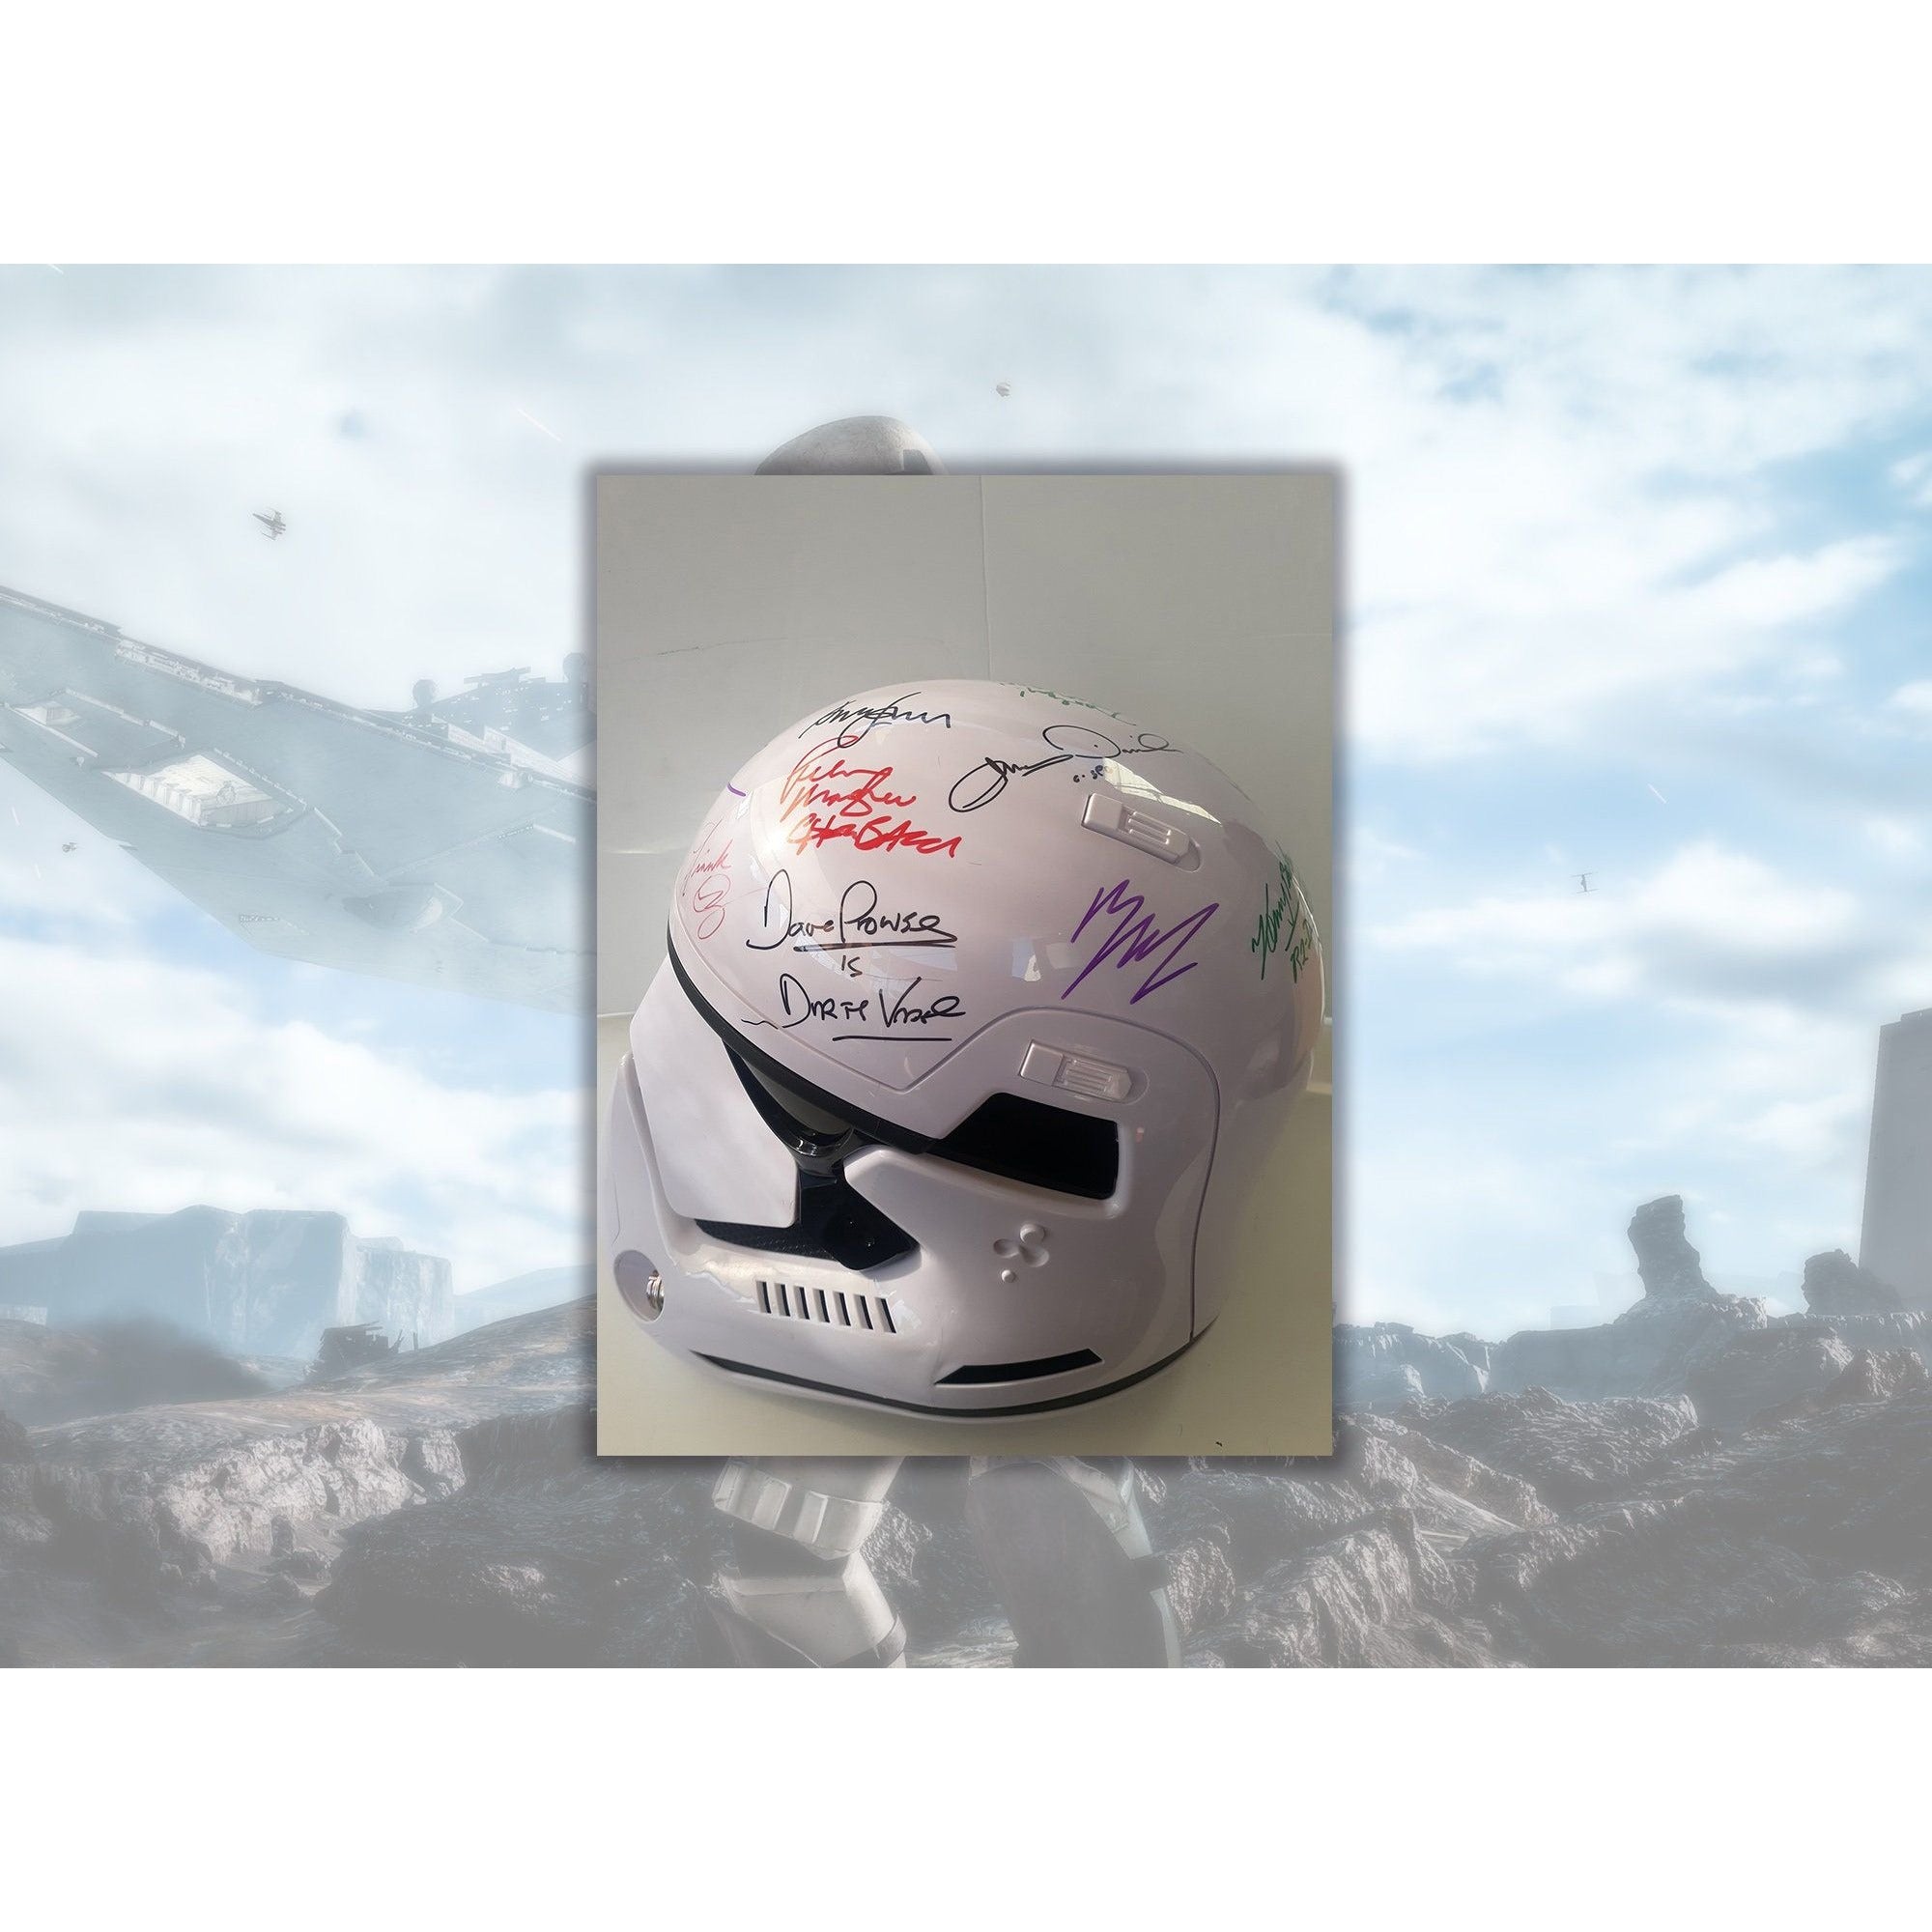 Harrison Ford, James Earl Jones, Carrie Fisher, Mark Hamill, Star Wars cast signed stormtrooper helmet signed with proof